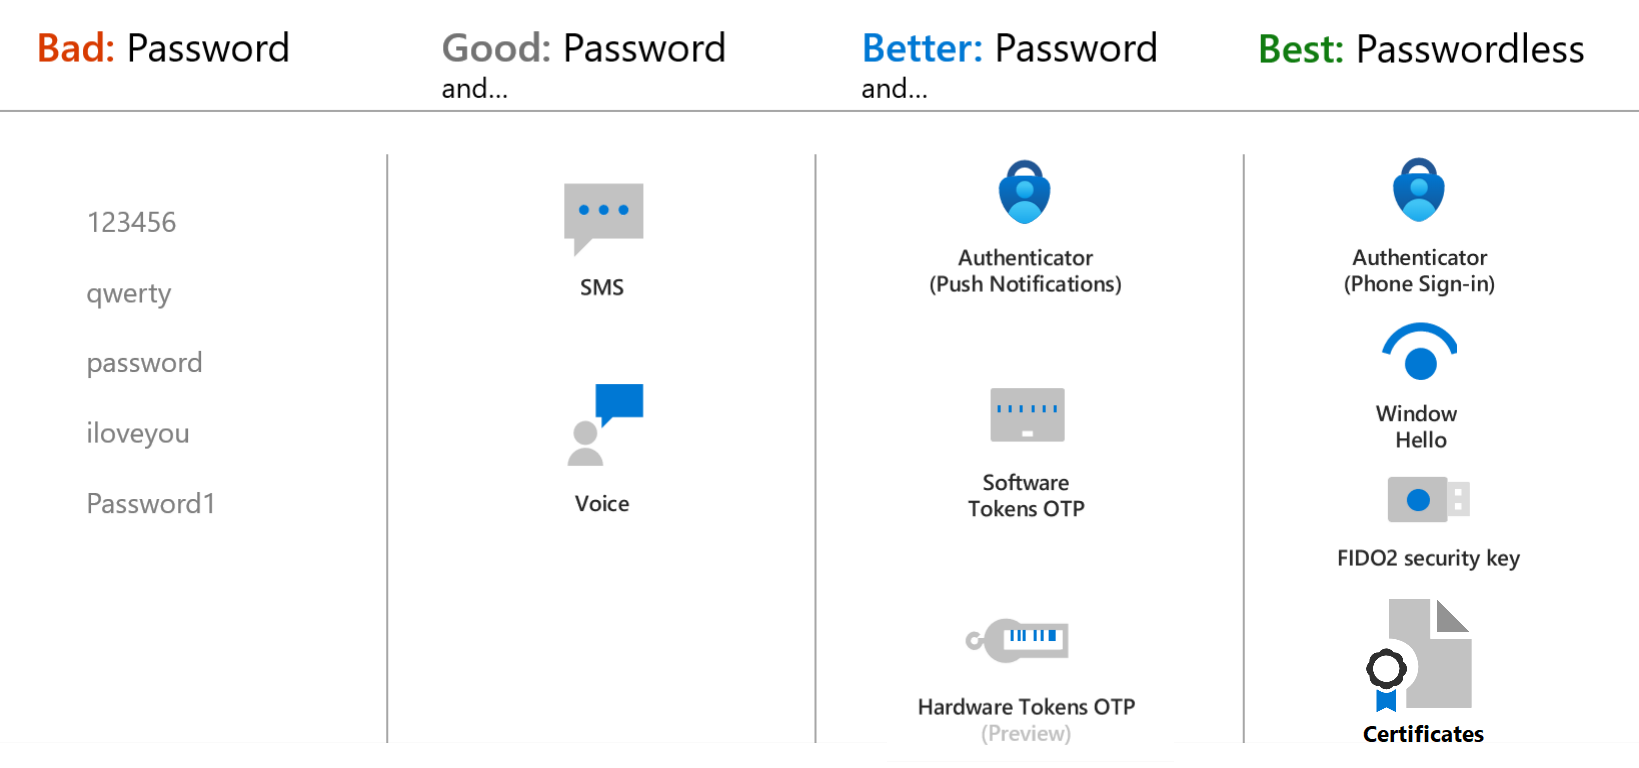 Table of the strengths and preferred authentication methods in Azure AD